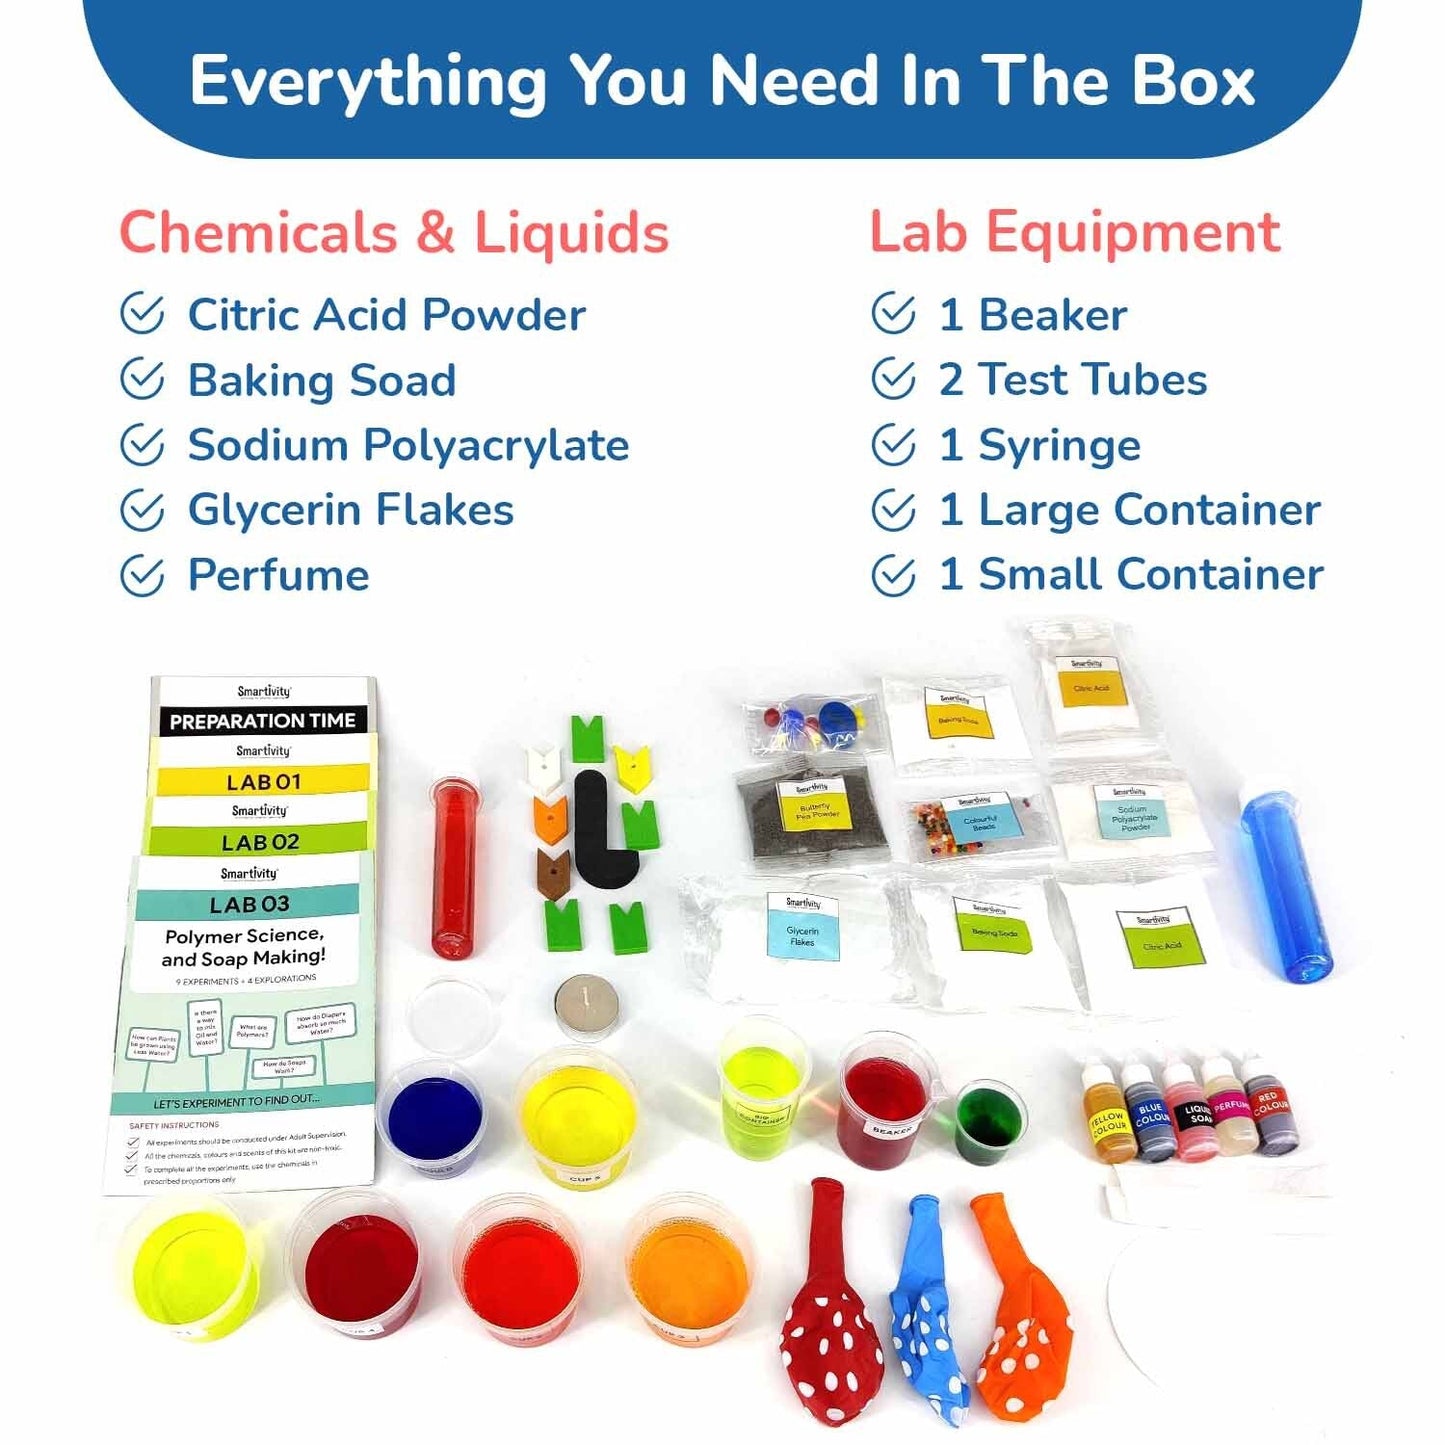 Mega Science Kit | Biggest STEAM Activity Box - 108 Experiments | 6-10 Years